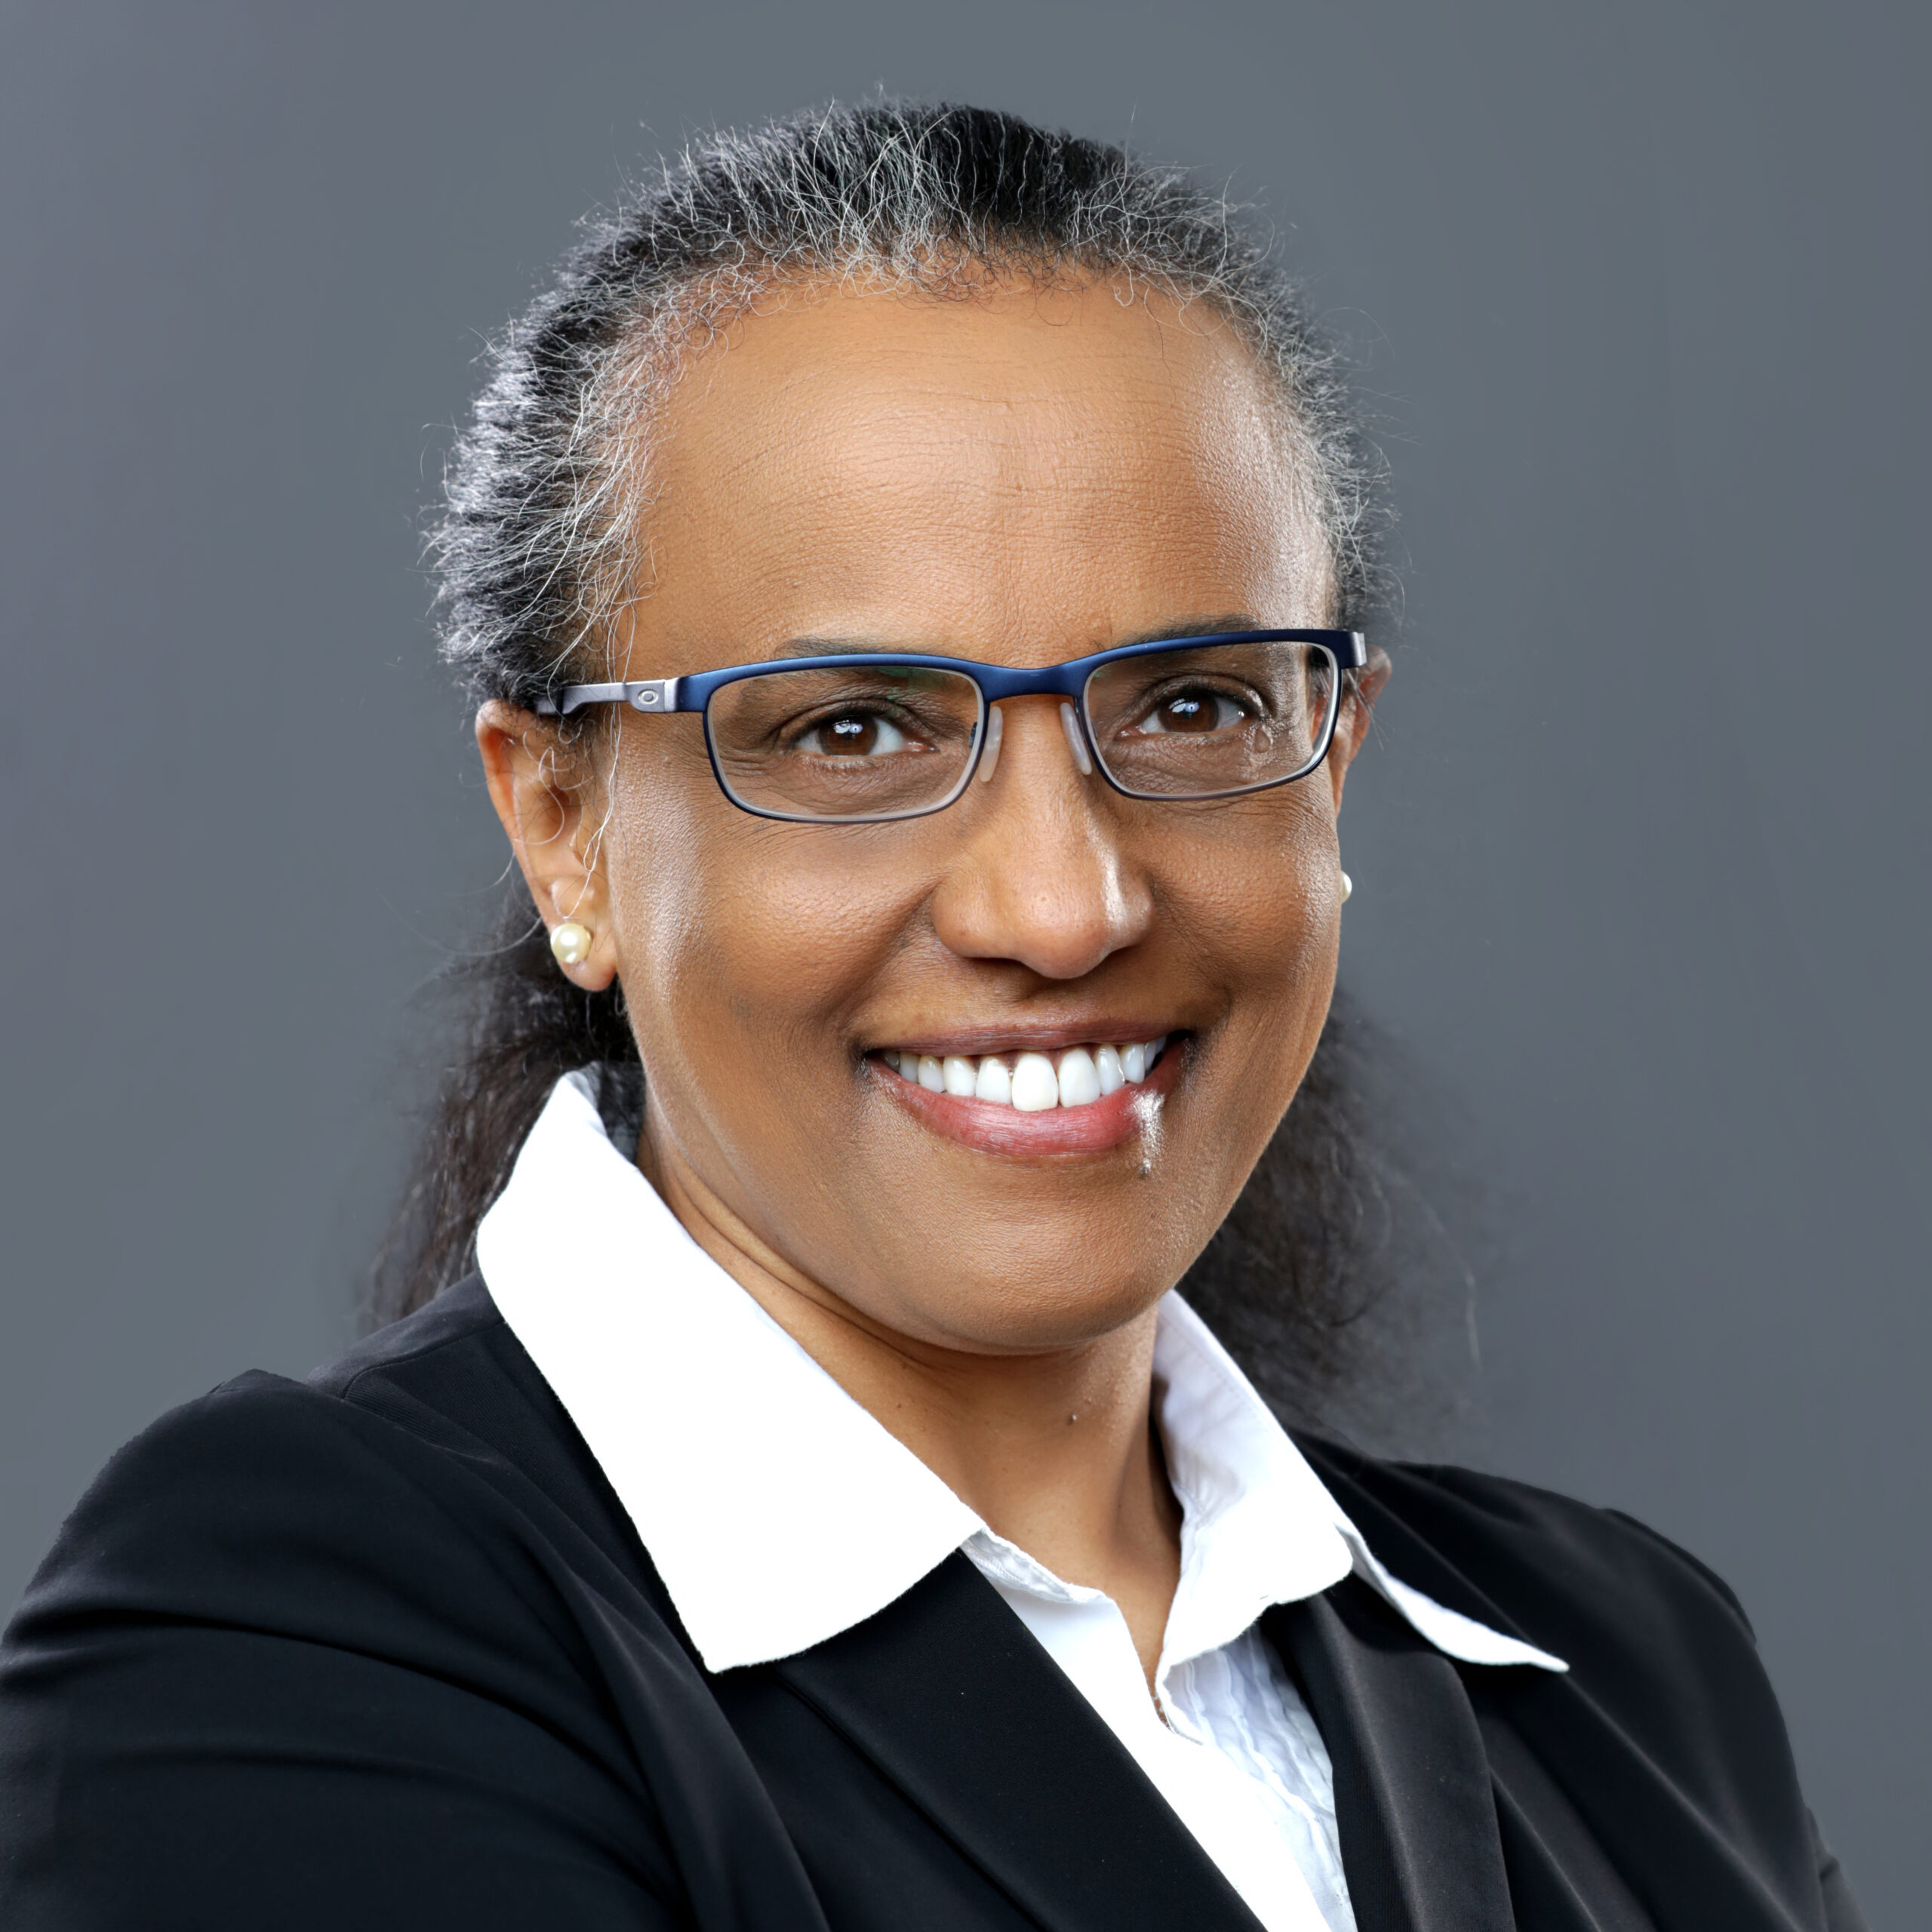 Professional Headshot on grey background for a woman